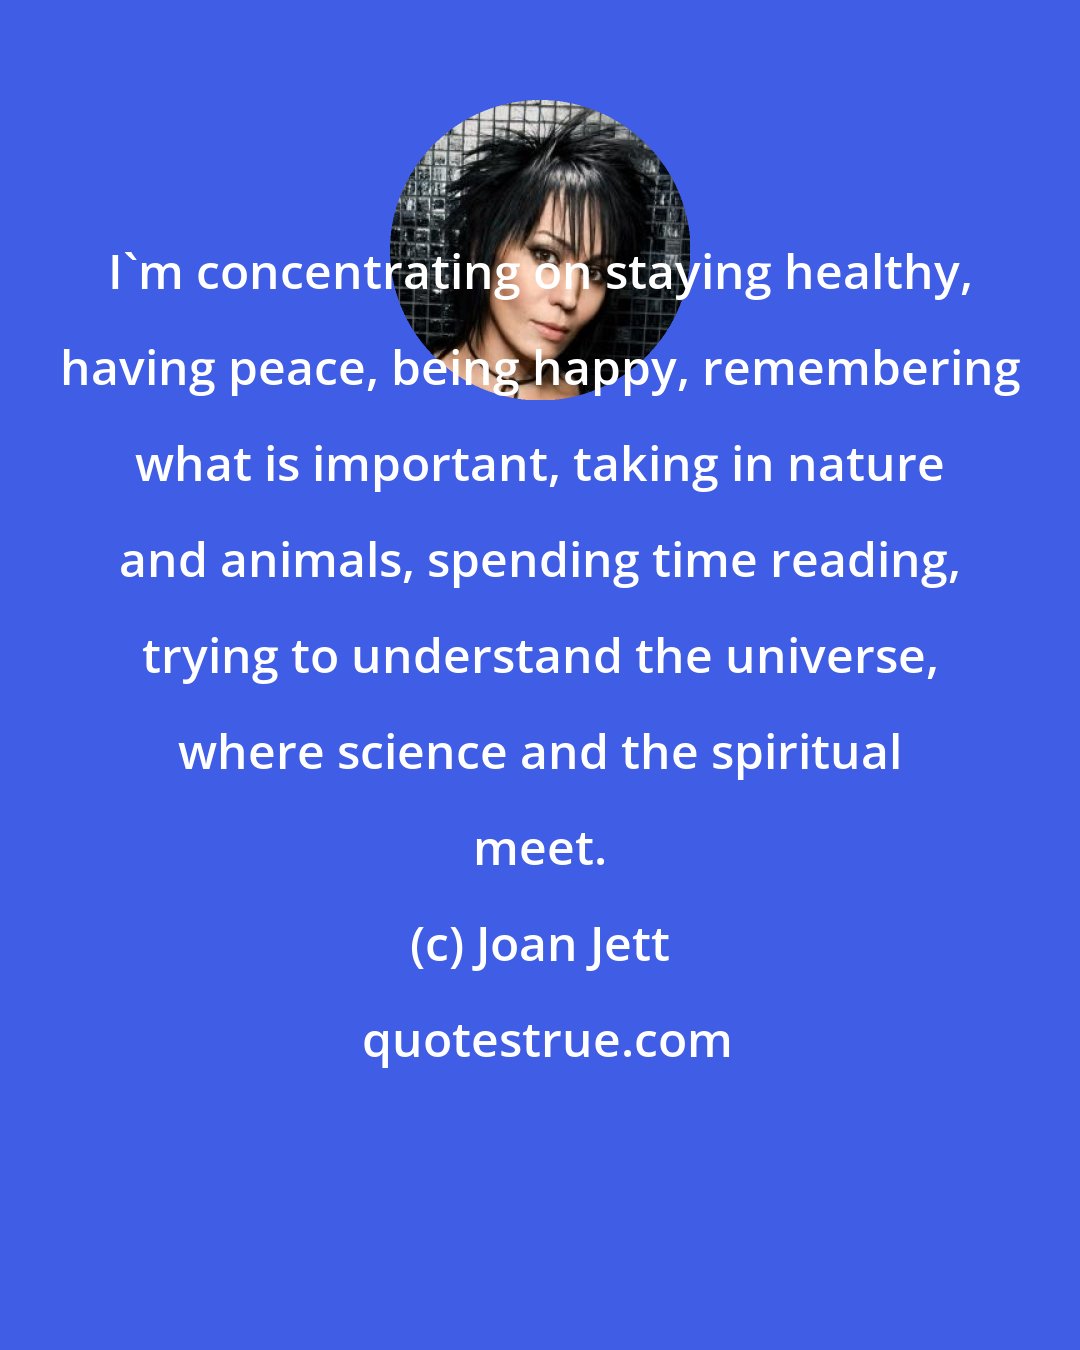 Joan Jett: I'm concentrating on staying healthy, having peace, being happy, remembering what is important, taking in nature and animals, spending time reading, trying to understand the universe, where science and the spiritual meet.